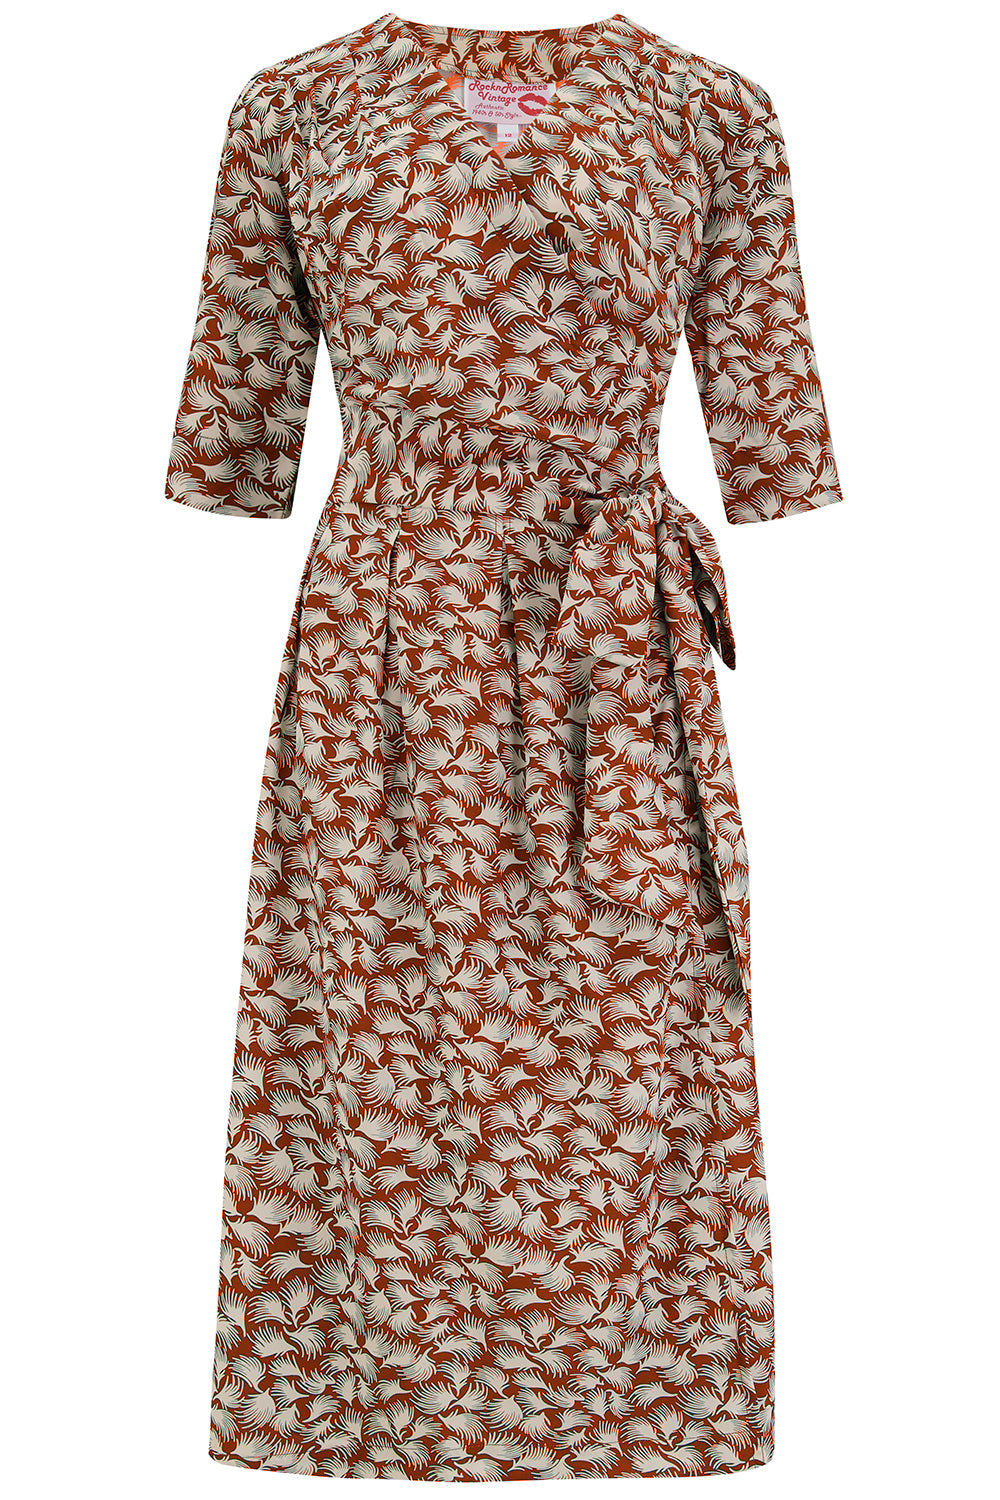 The "Vivien" Full Wrap Dress in Cinnamon Whisp, True 1940s To Early 1950s Style